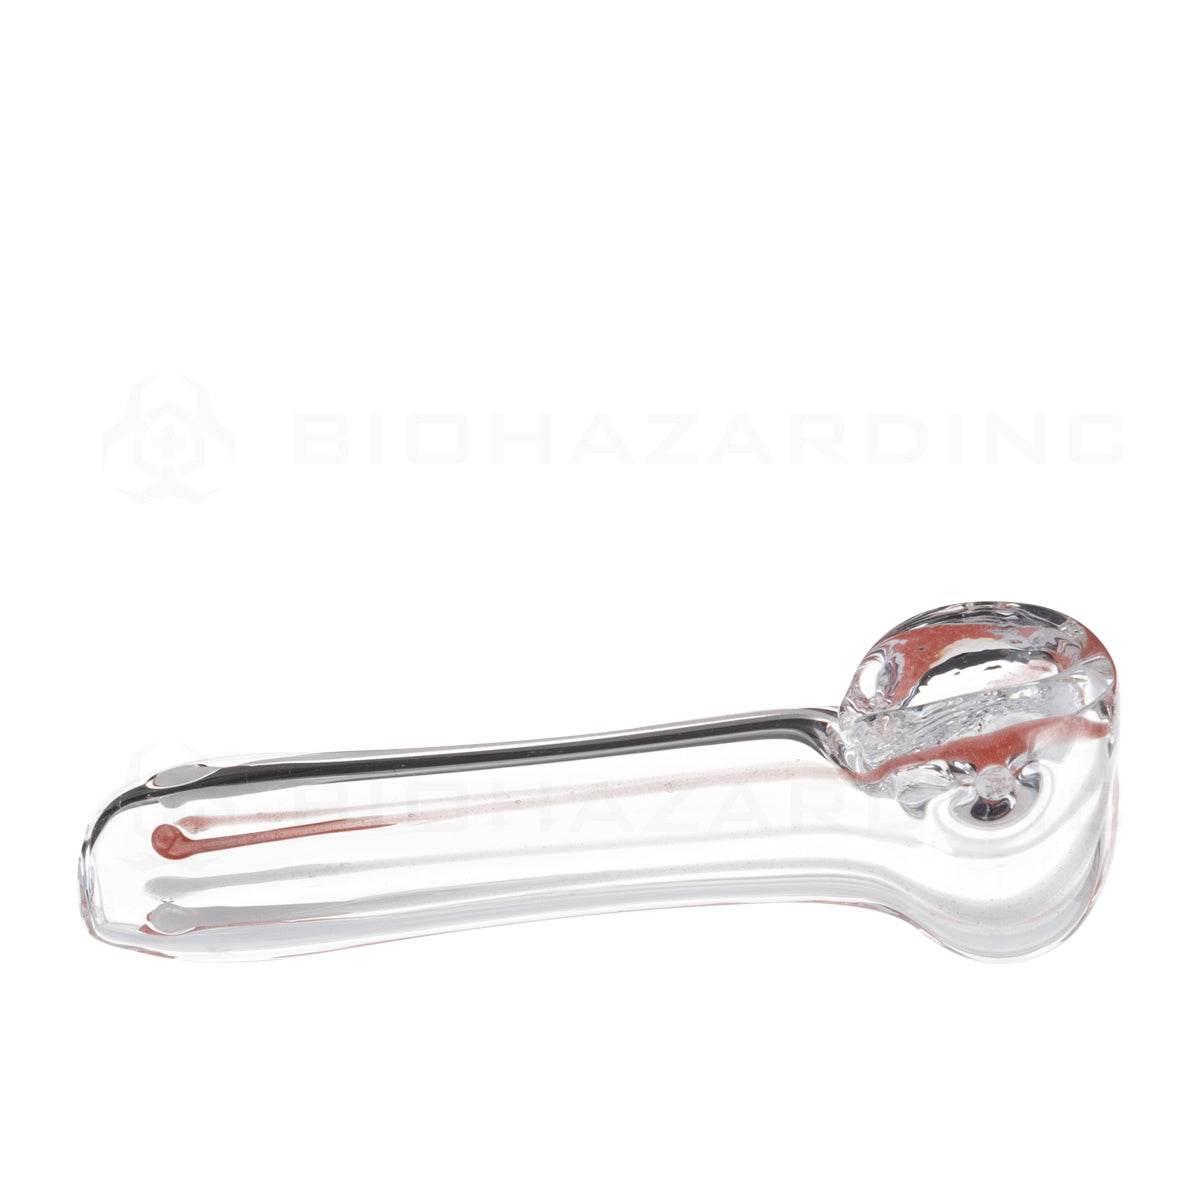 Hand Pipe | Micro Candy Cane Glass - 10 Count | 2-3" - Glass - Assorted Glass Hand Pipe Biohazard Inc   